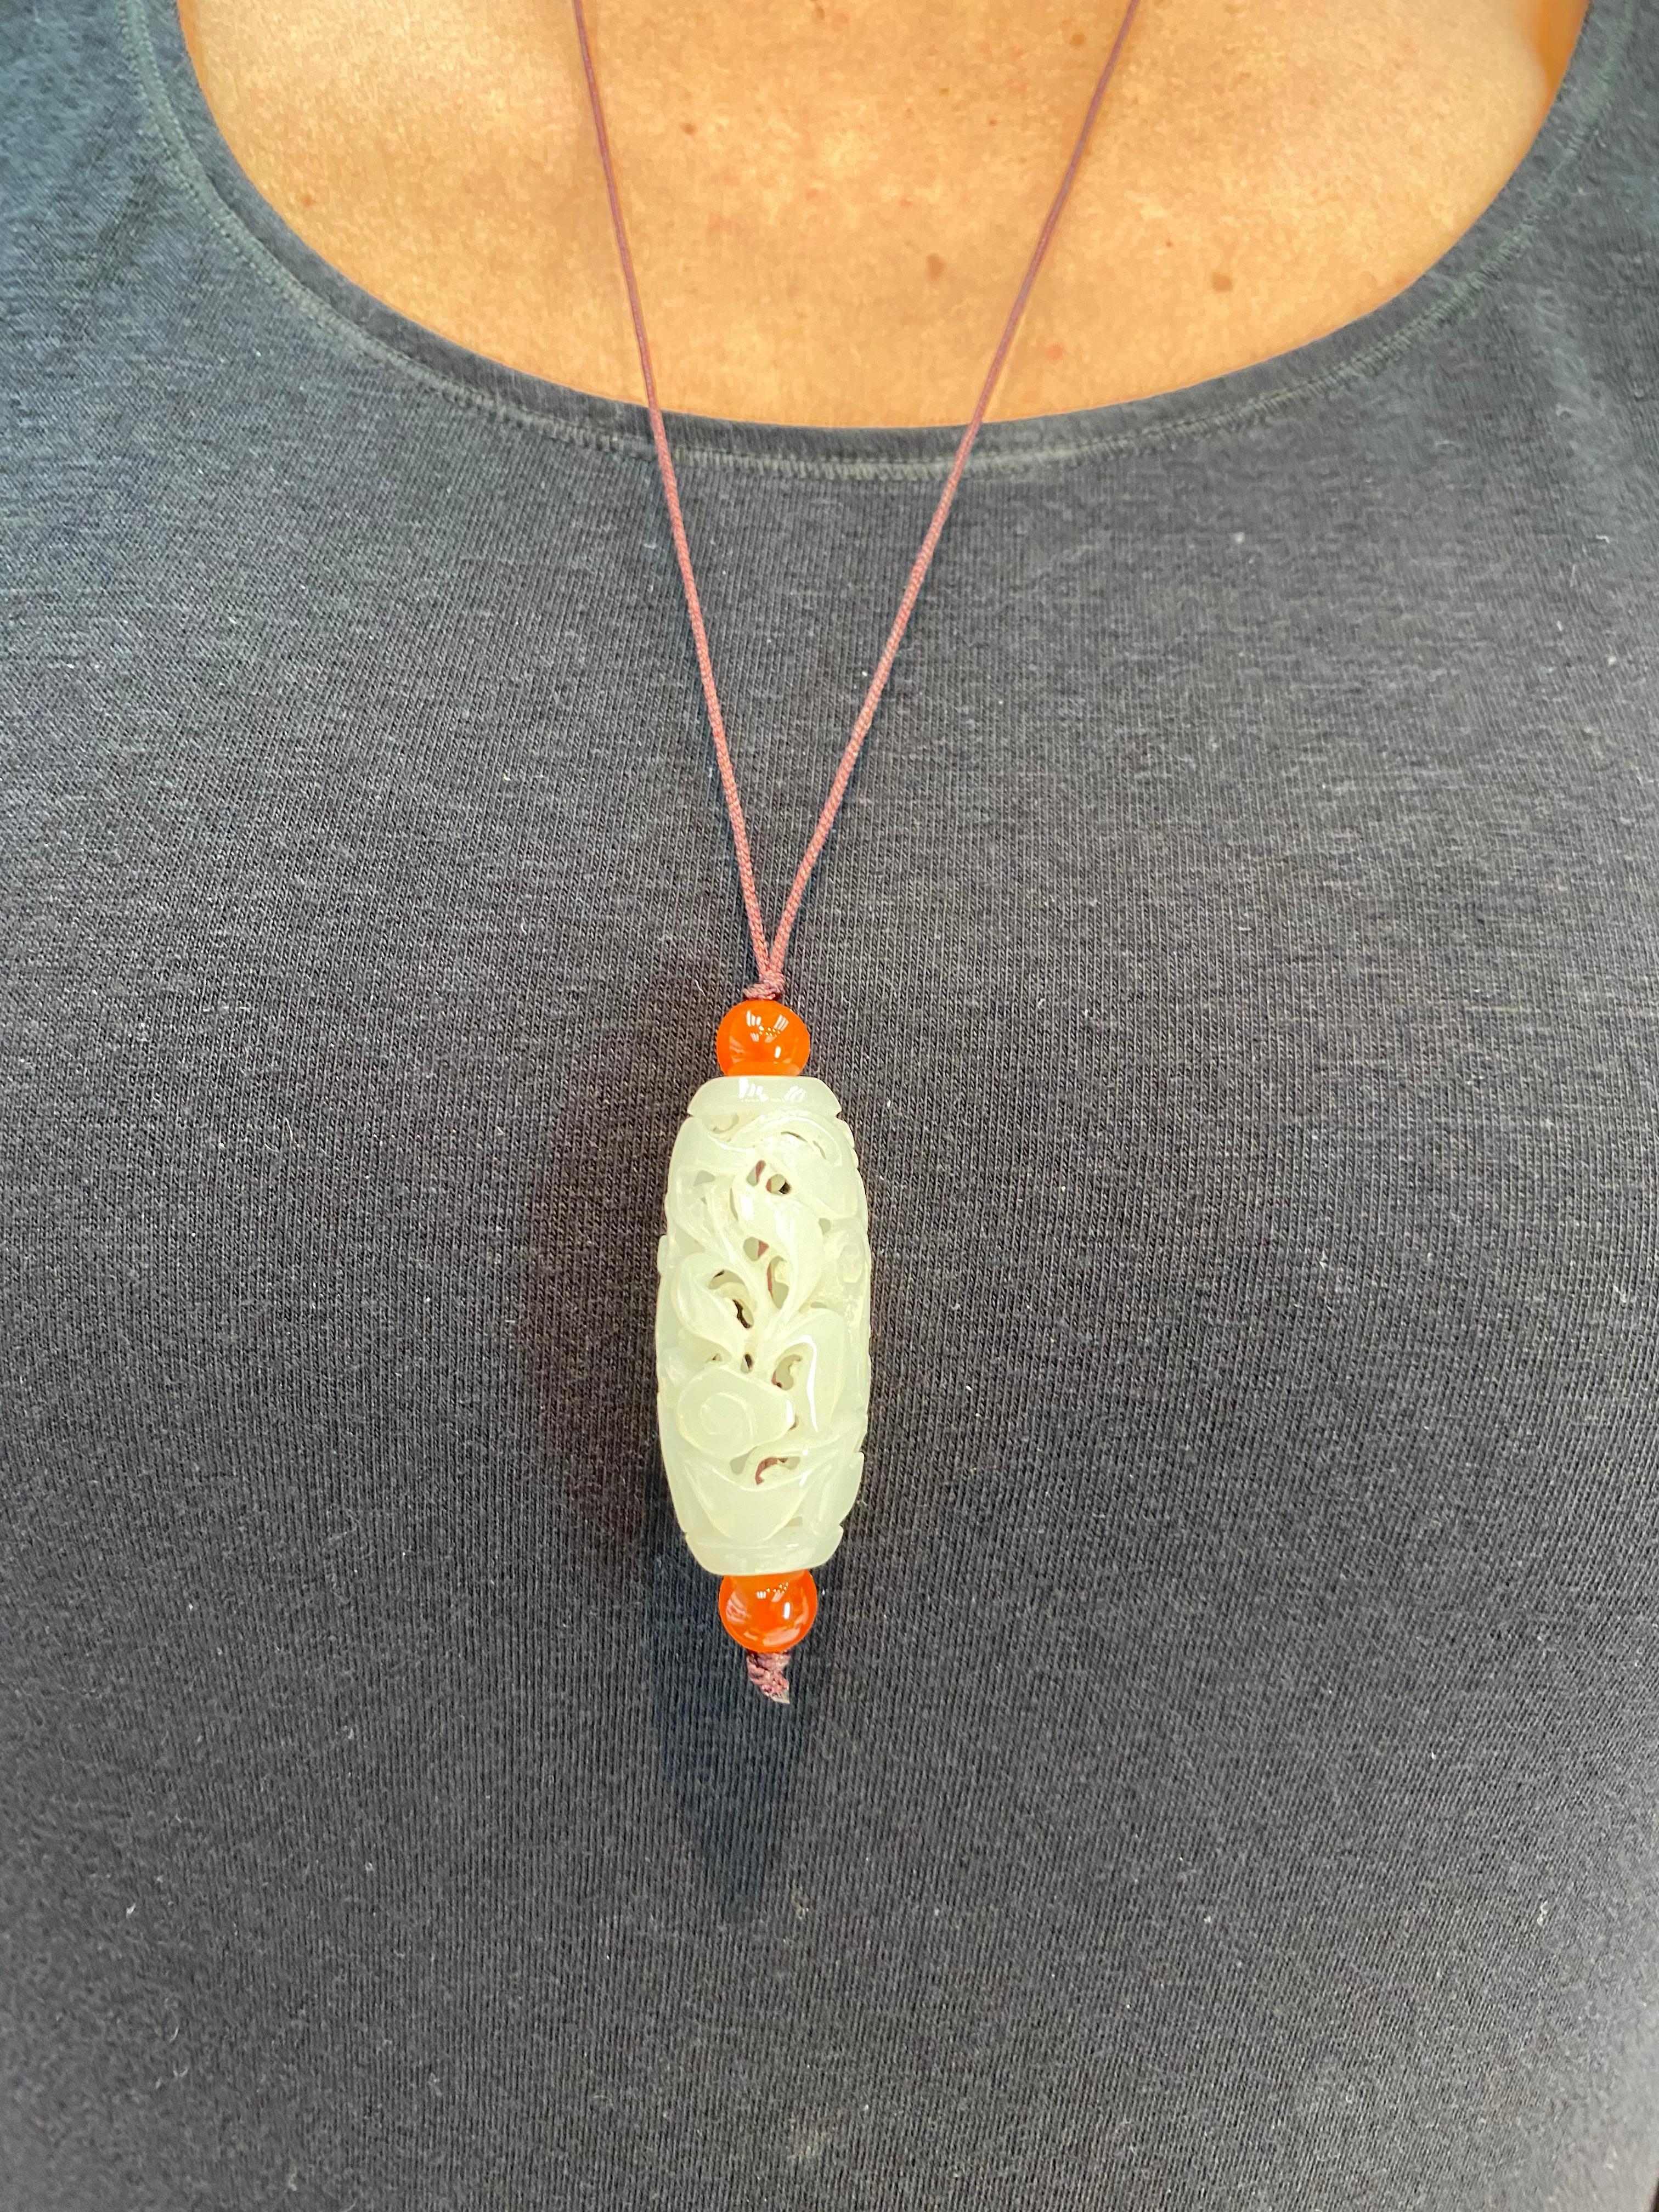 For your consideration. This pendant is certified natural nephrite jade. This jade is very well carved and well hollowed. This well hollowed carving is not easy to do. In fact it is very difficult to do to this high standard. The Hetian nephrite